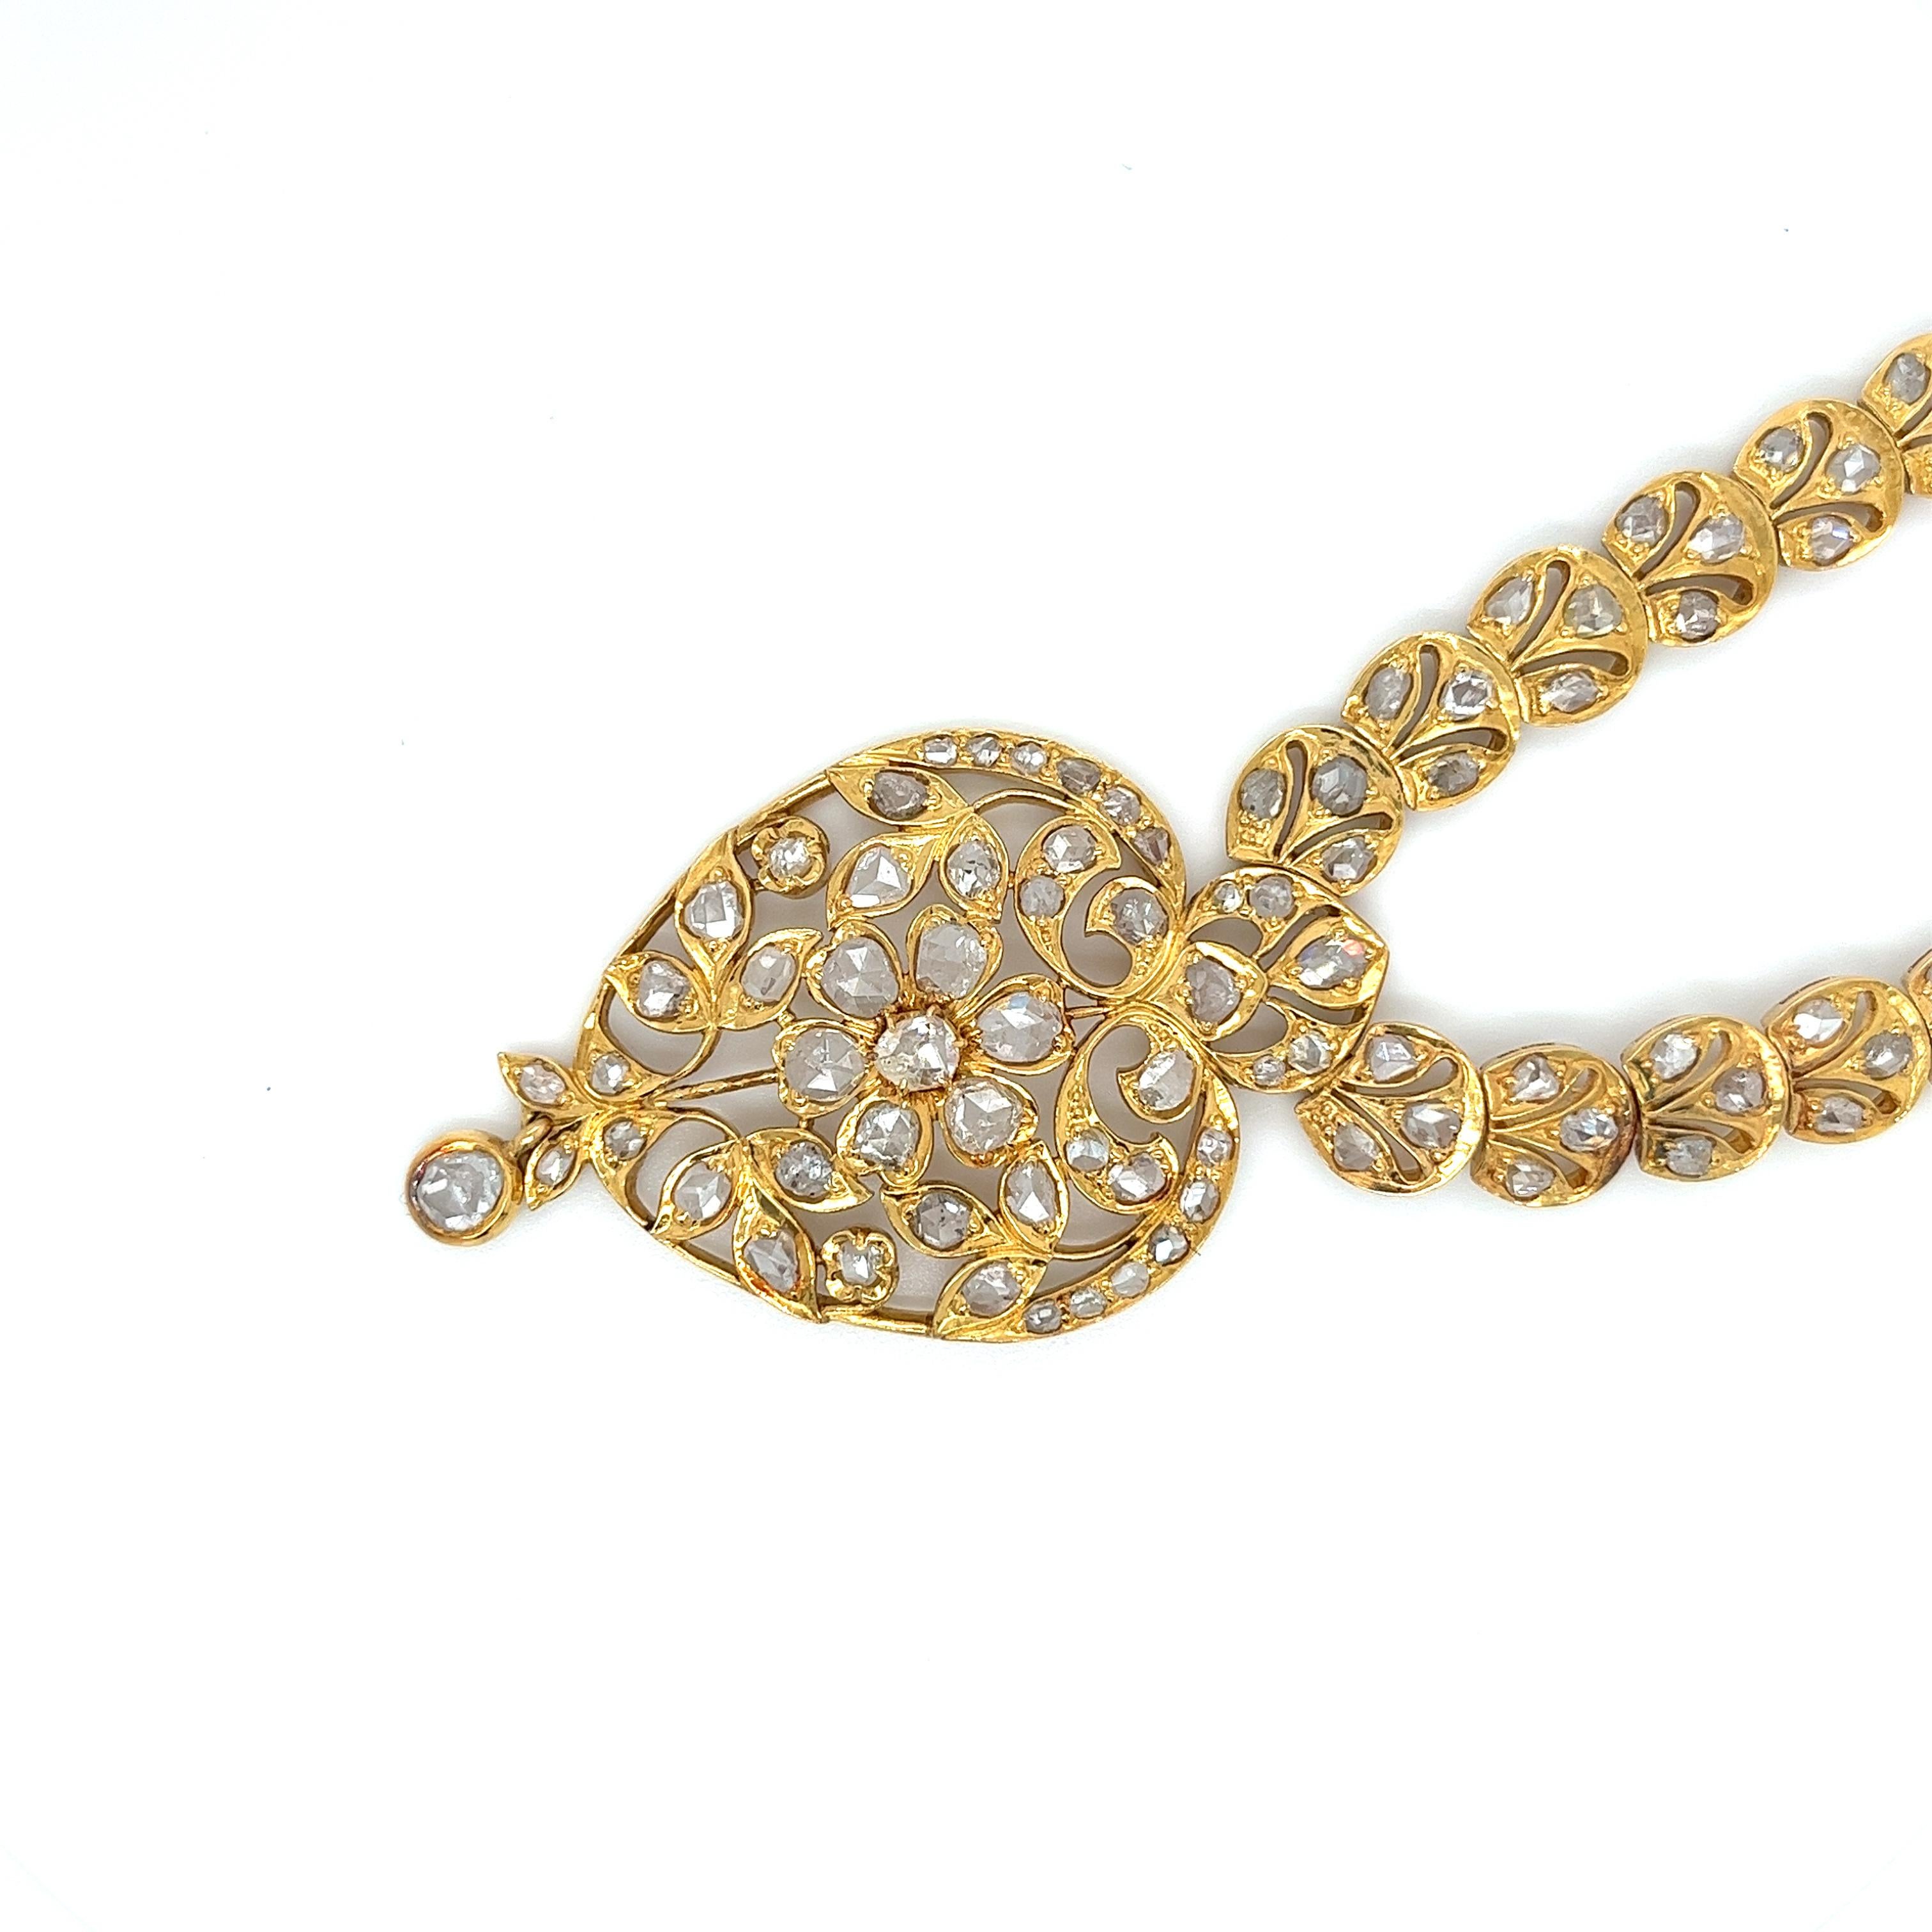 A Victorian-inspired Rose Cut White Diamond and 22K Yellow Gold necklace. Featuring 116 Rose-Cut White Diamonds totaling roughly 25 carats and set in 49 grams of 22K Yellow Gold.

Details:
✔ Stone: Diamond
✔ Cut: Rose Cut
✔ Stone Weight: ~25